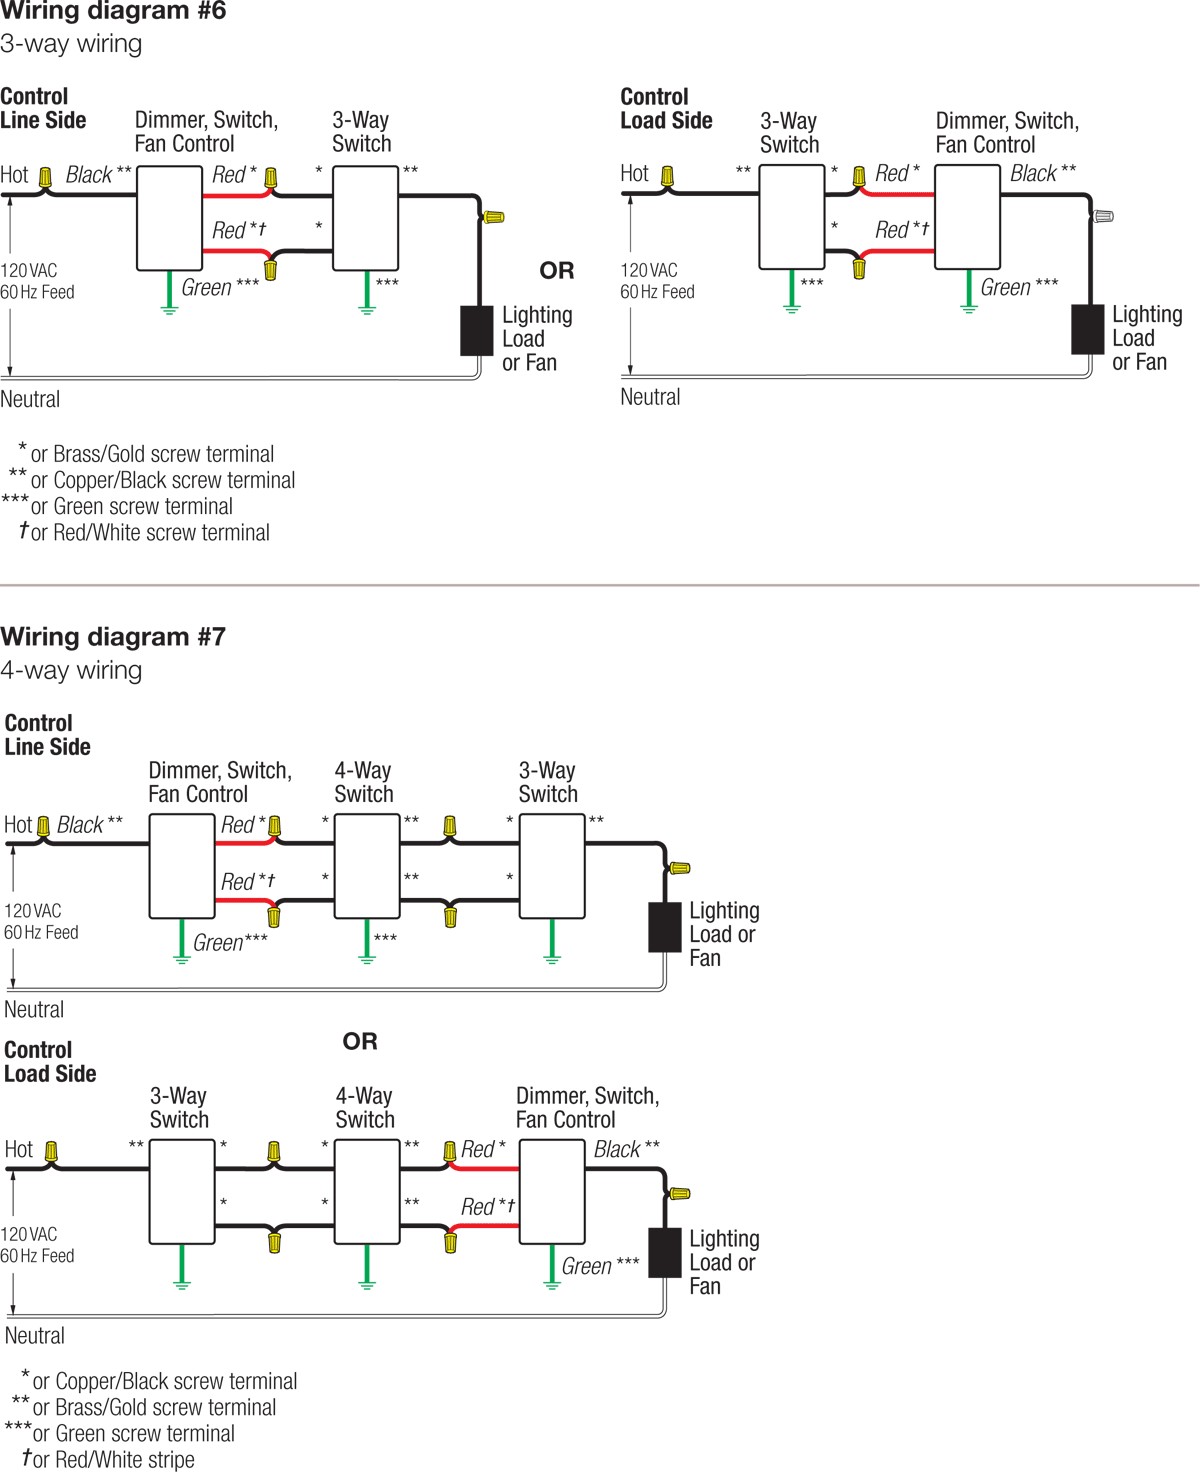 Lutron Wiring Diagrams Dimmer 3 Way Wire Diagram Dv 603p Gif In